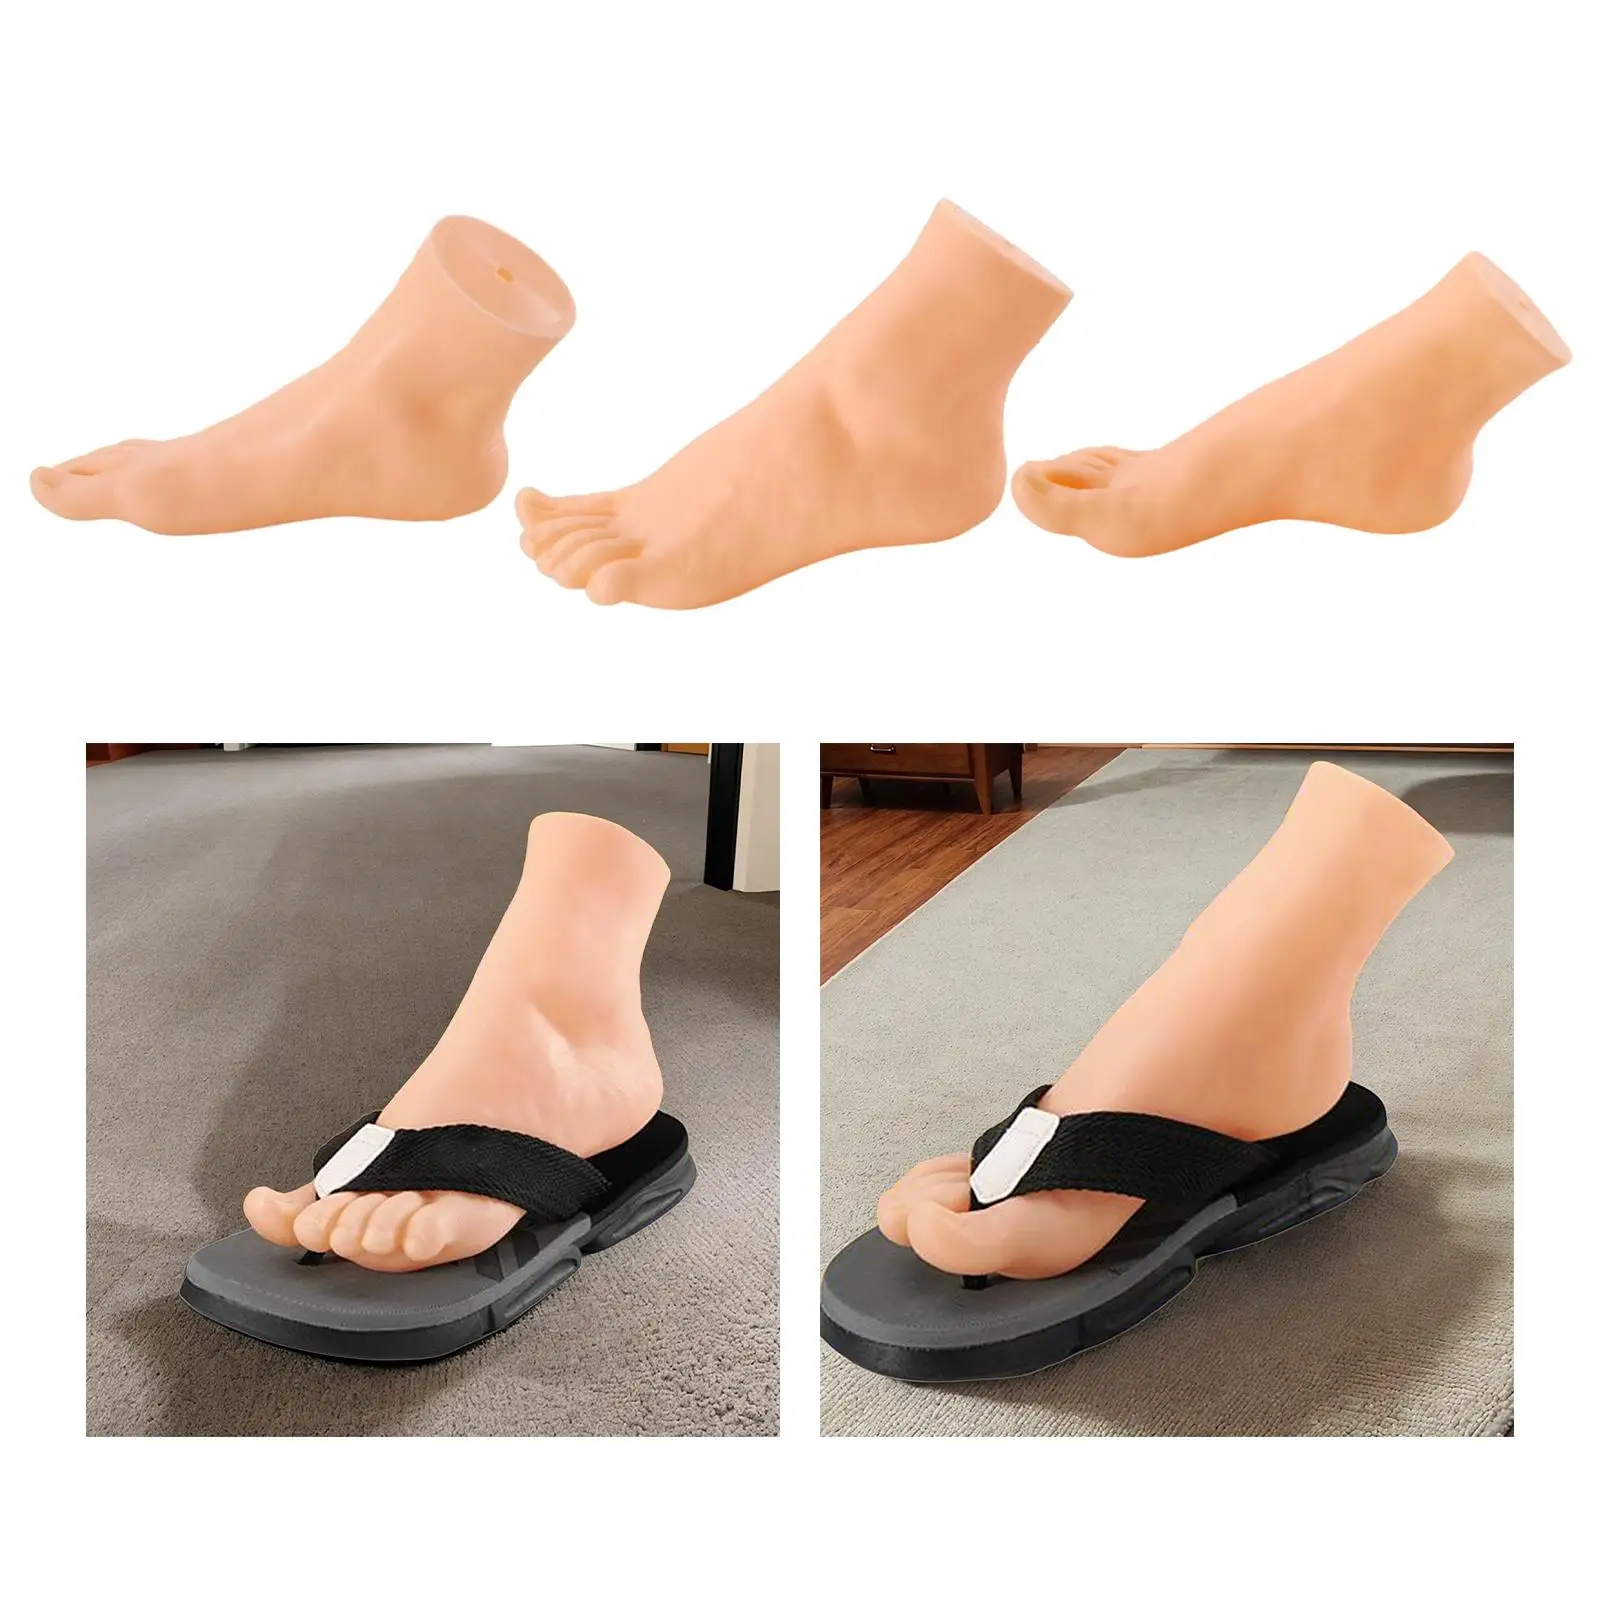 Foot Model Lightweight Shoes Display Props Mannequin Foot Display Sandals Shoes Sock Display for Home Shop Retail Shoes Chains